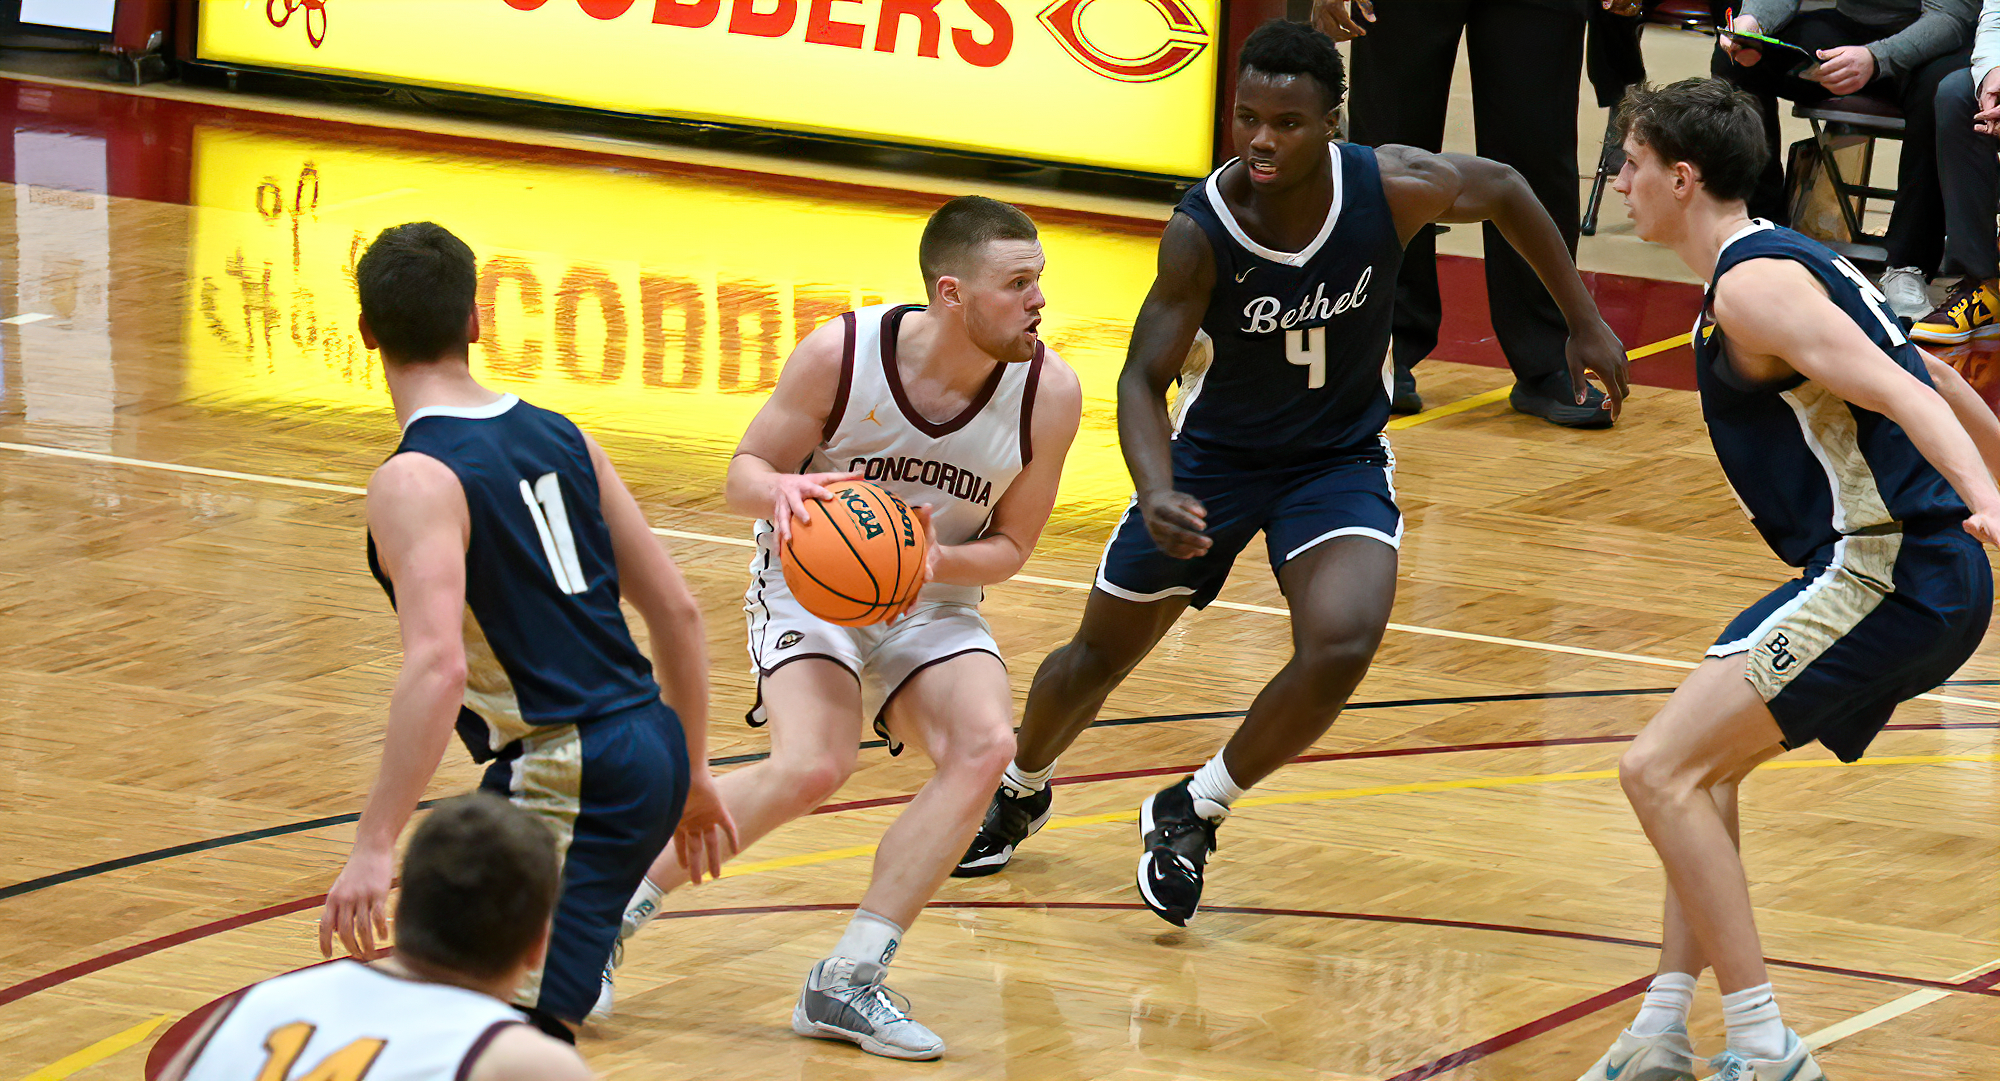 Senior Matt Johnson tries to drive through the Bethel defense in the second half of the Cobbers' game with the Royals.